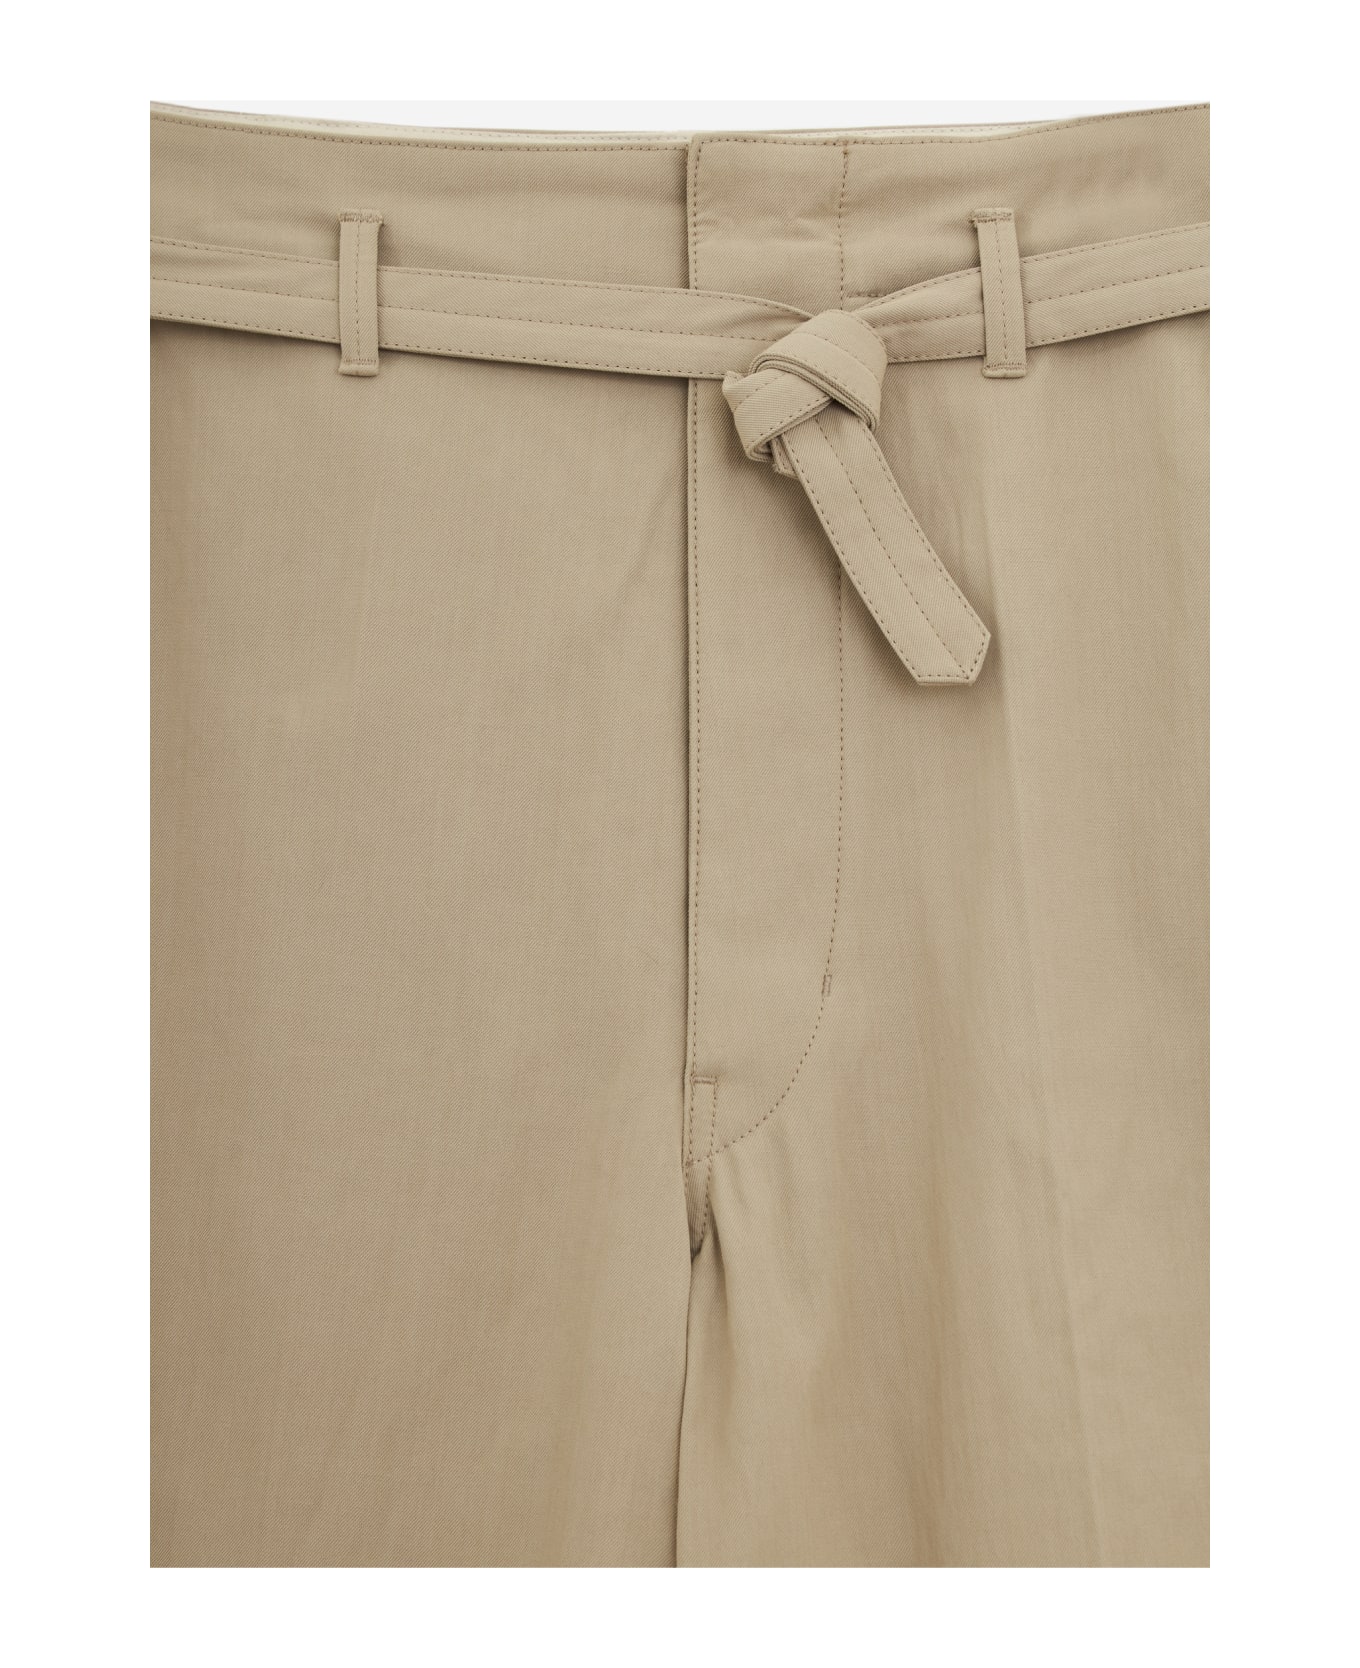 Lemaire Loose Chino Pants - beige